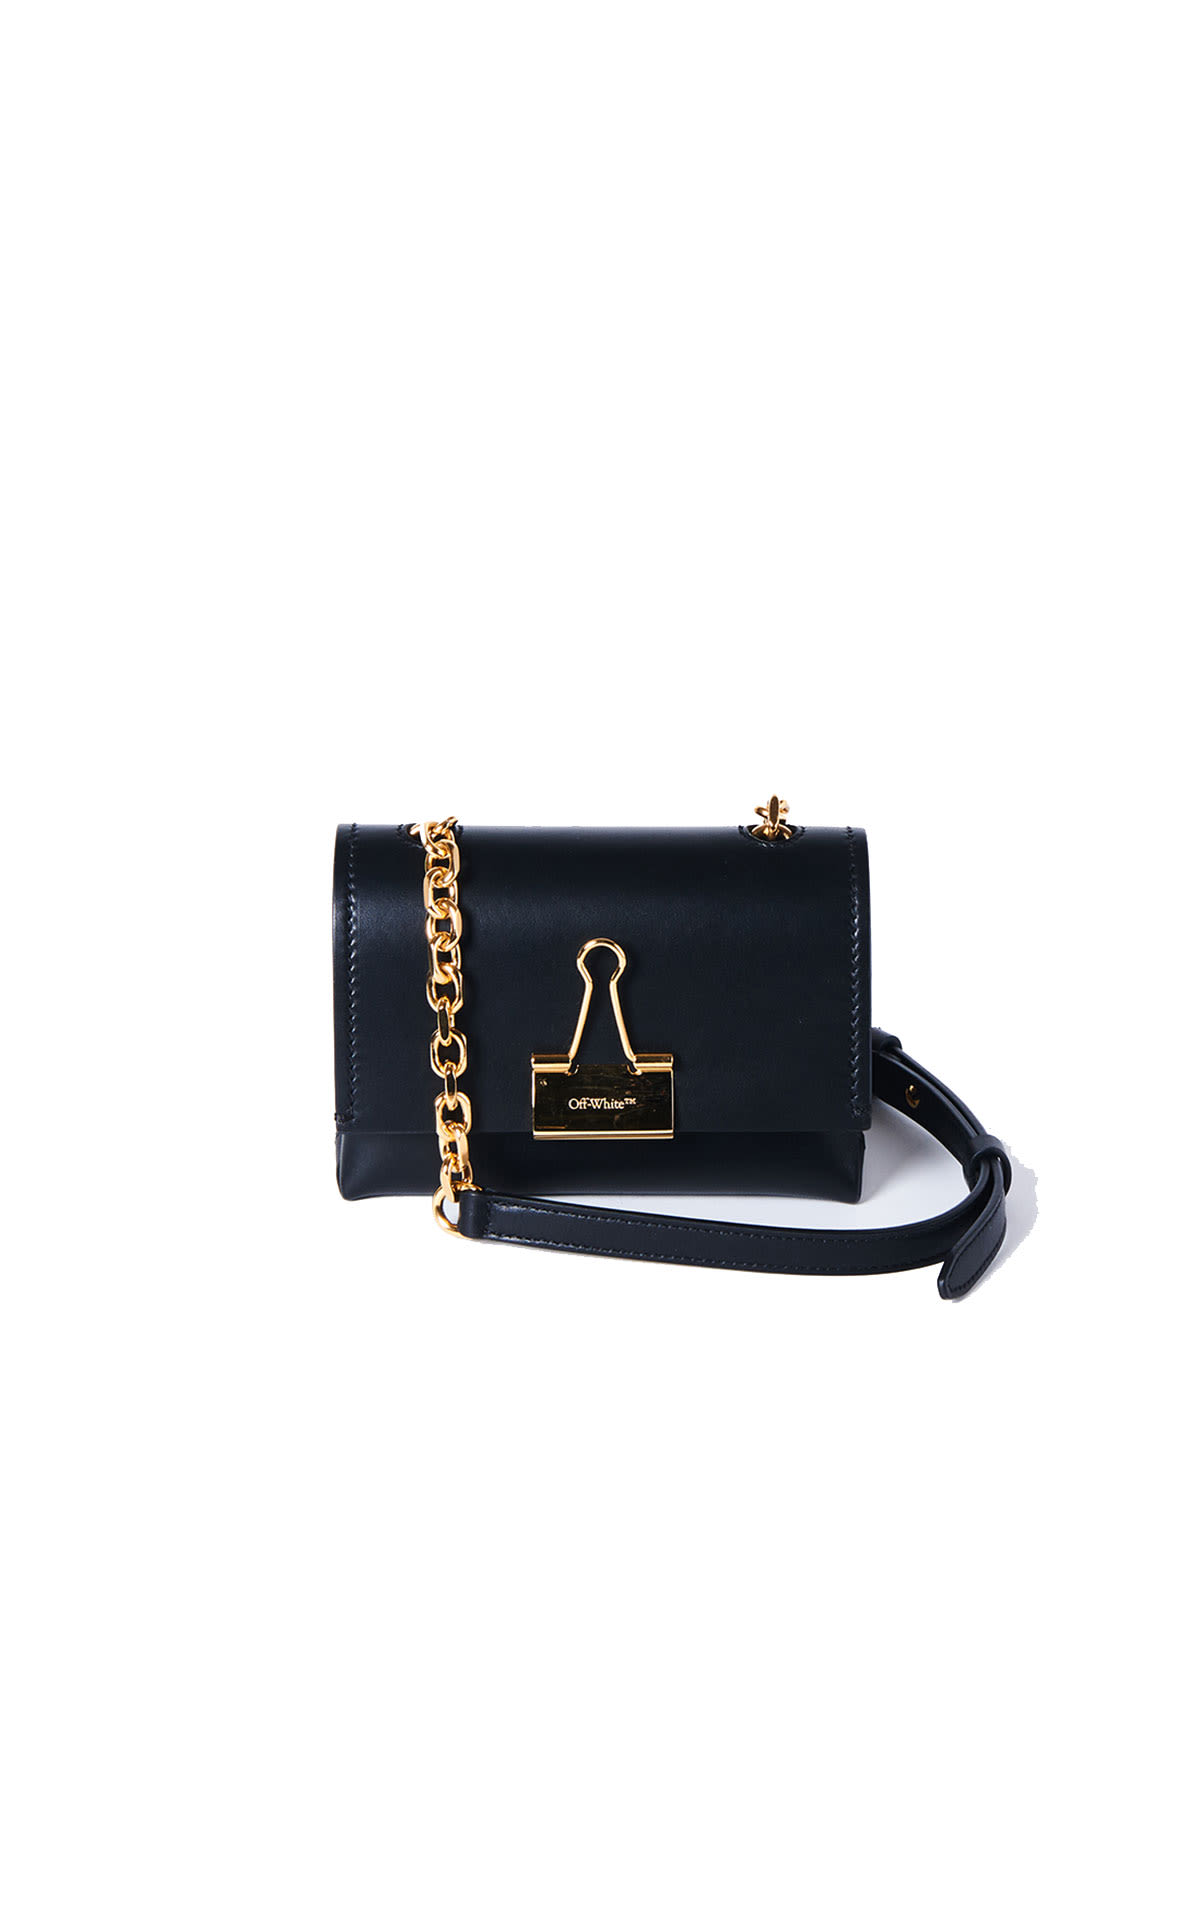 Off-White Soft small bag black from Bicester Village